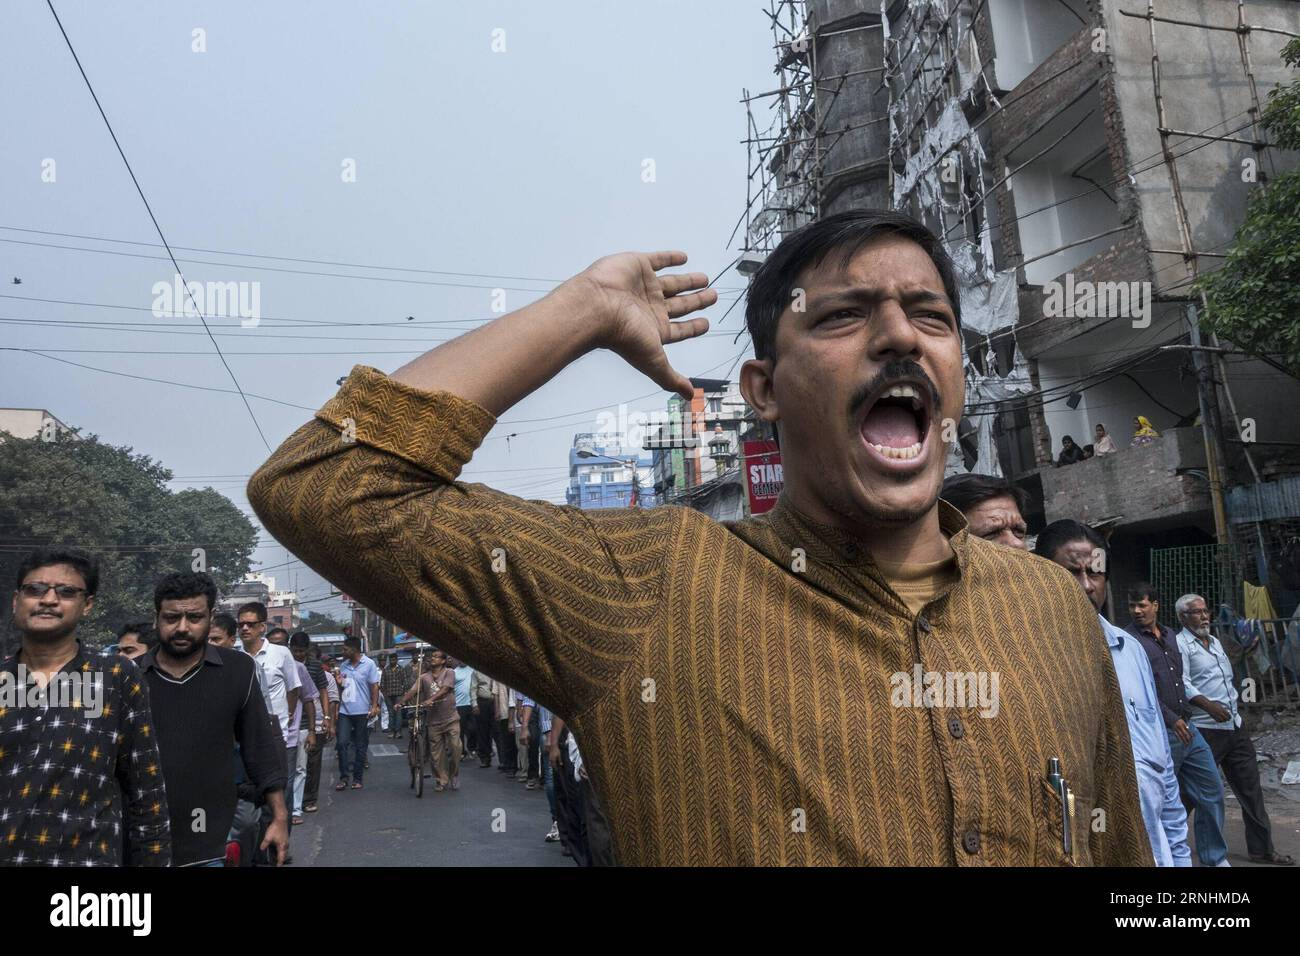 (161128) -- KOLKATA, Nov. 28, 2016 -- An Indian activist from the Communist Party of India (Marxist) protests against the recent demonetization move at a rally in Kolkata, capital of eastern Indian state West Bengal, Nov. 28, 2016. India s opposition parties Monday called for nationwide protests over the government s demonetization move. ) (lrz) INDIA-KOLKATA-PROTEST TumpaxMondal PUBLICATIONxNOTxINxCHN   Kolkata Nov 28 2016 to Indian Activist from The Communist Party of India Marxist Protest against The Recent  Move AT a Rally in Kolkata Capital of Eastern Indian State WEST Bengal Nov 28 2016 Stock Photo